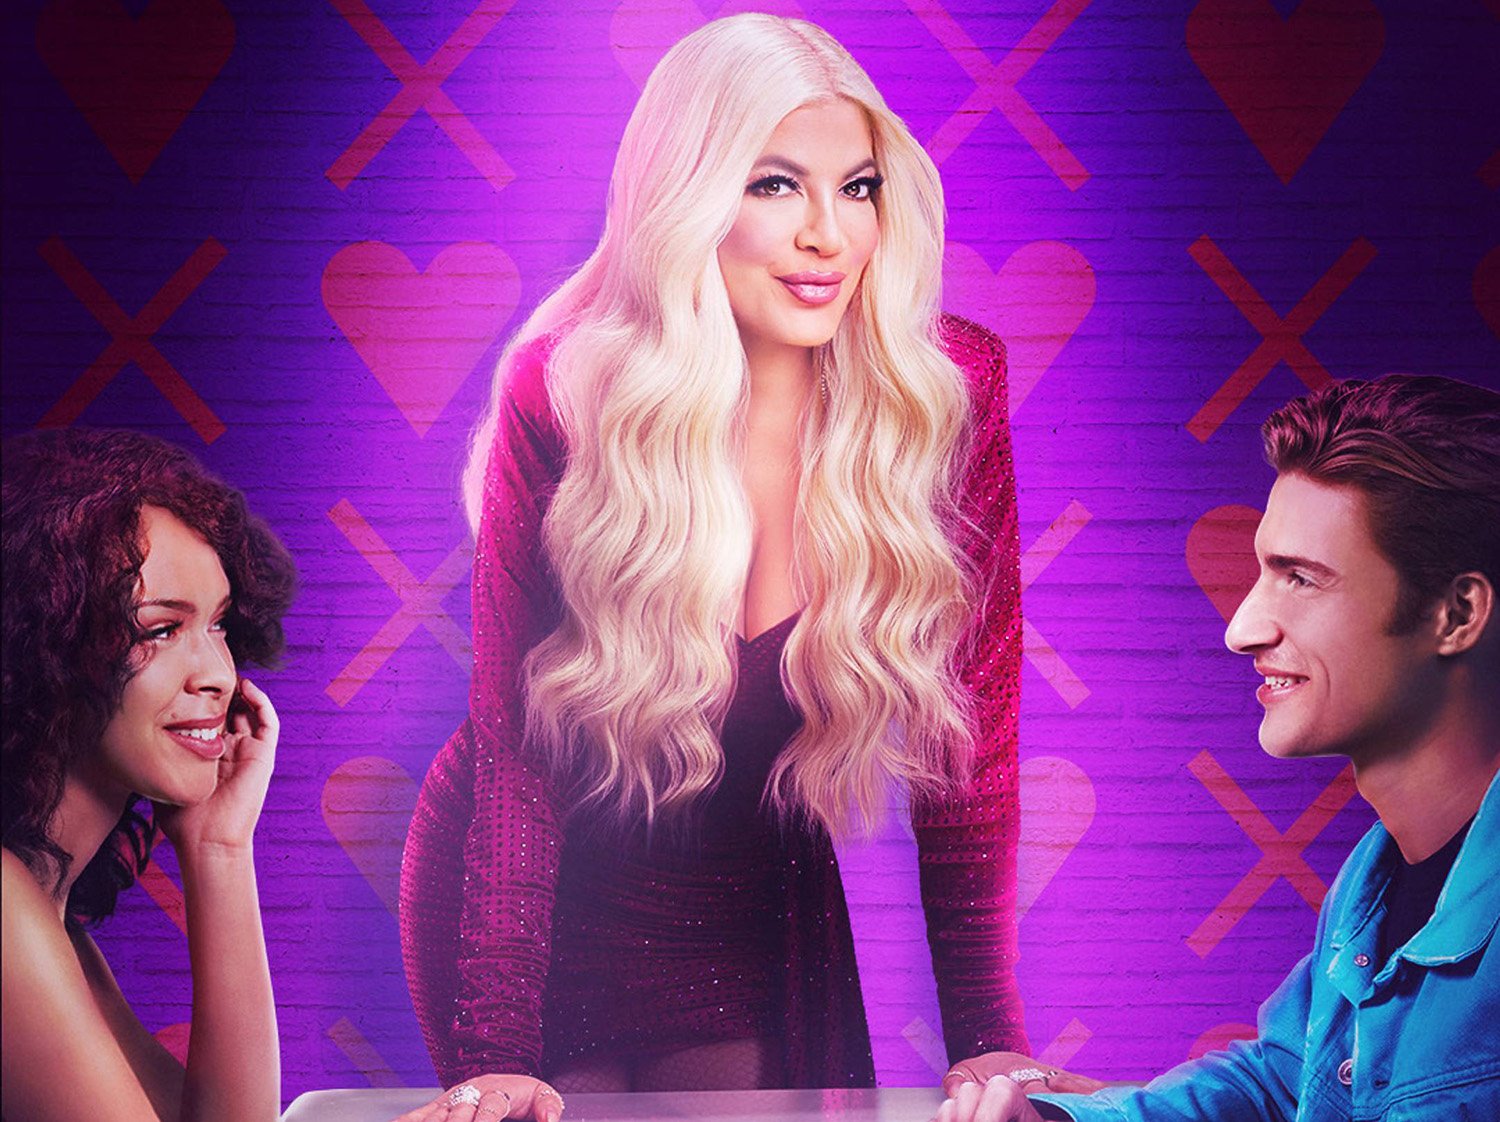 Tori Spelling stands between two contestants in Love at First Lie artwork ahead of the premiere date